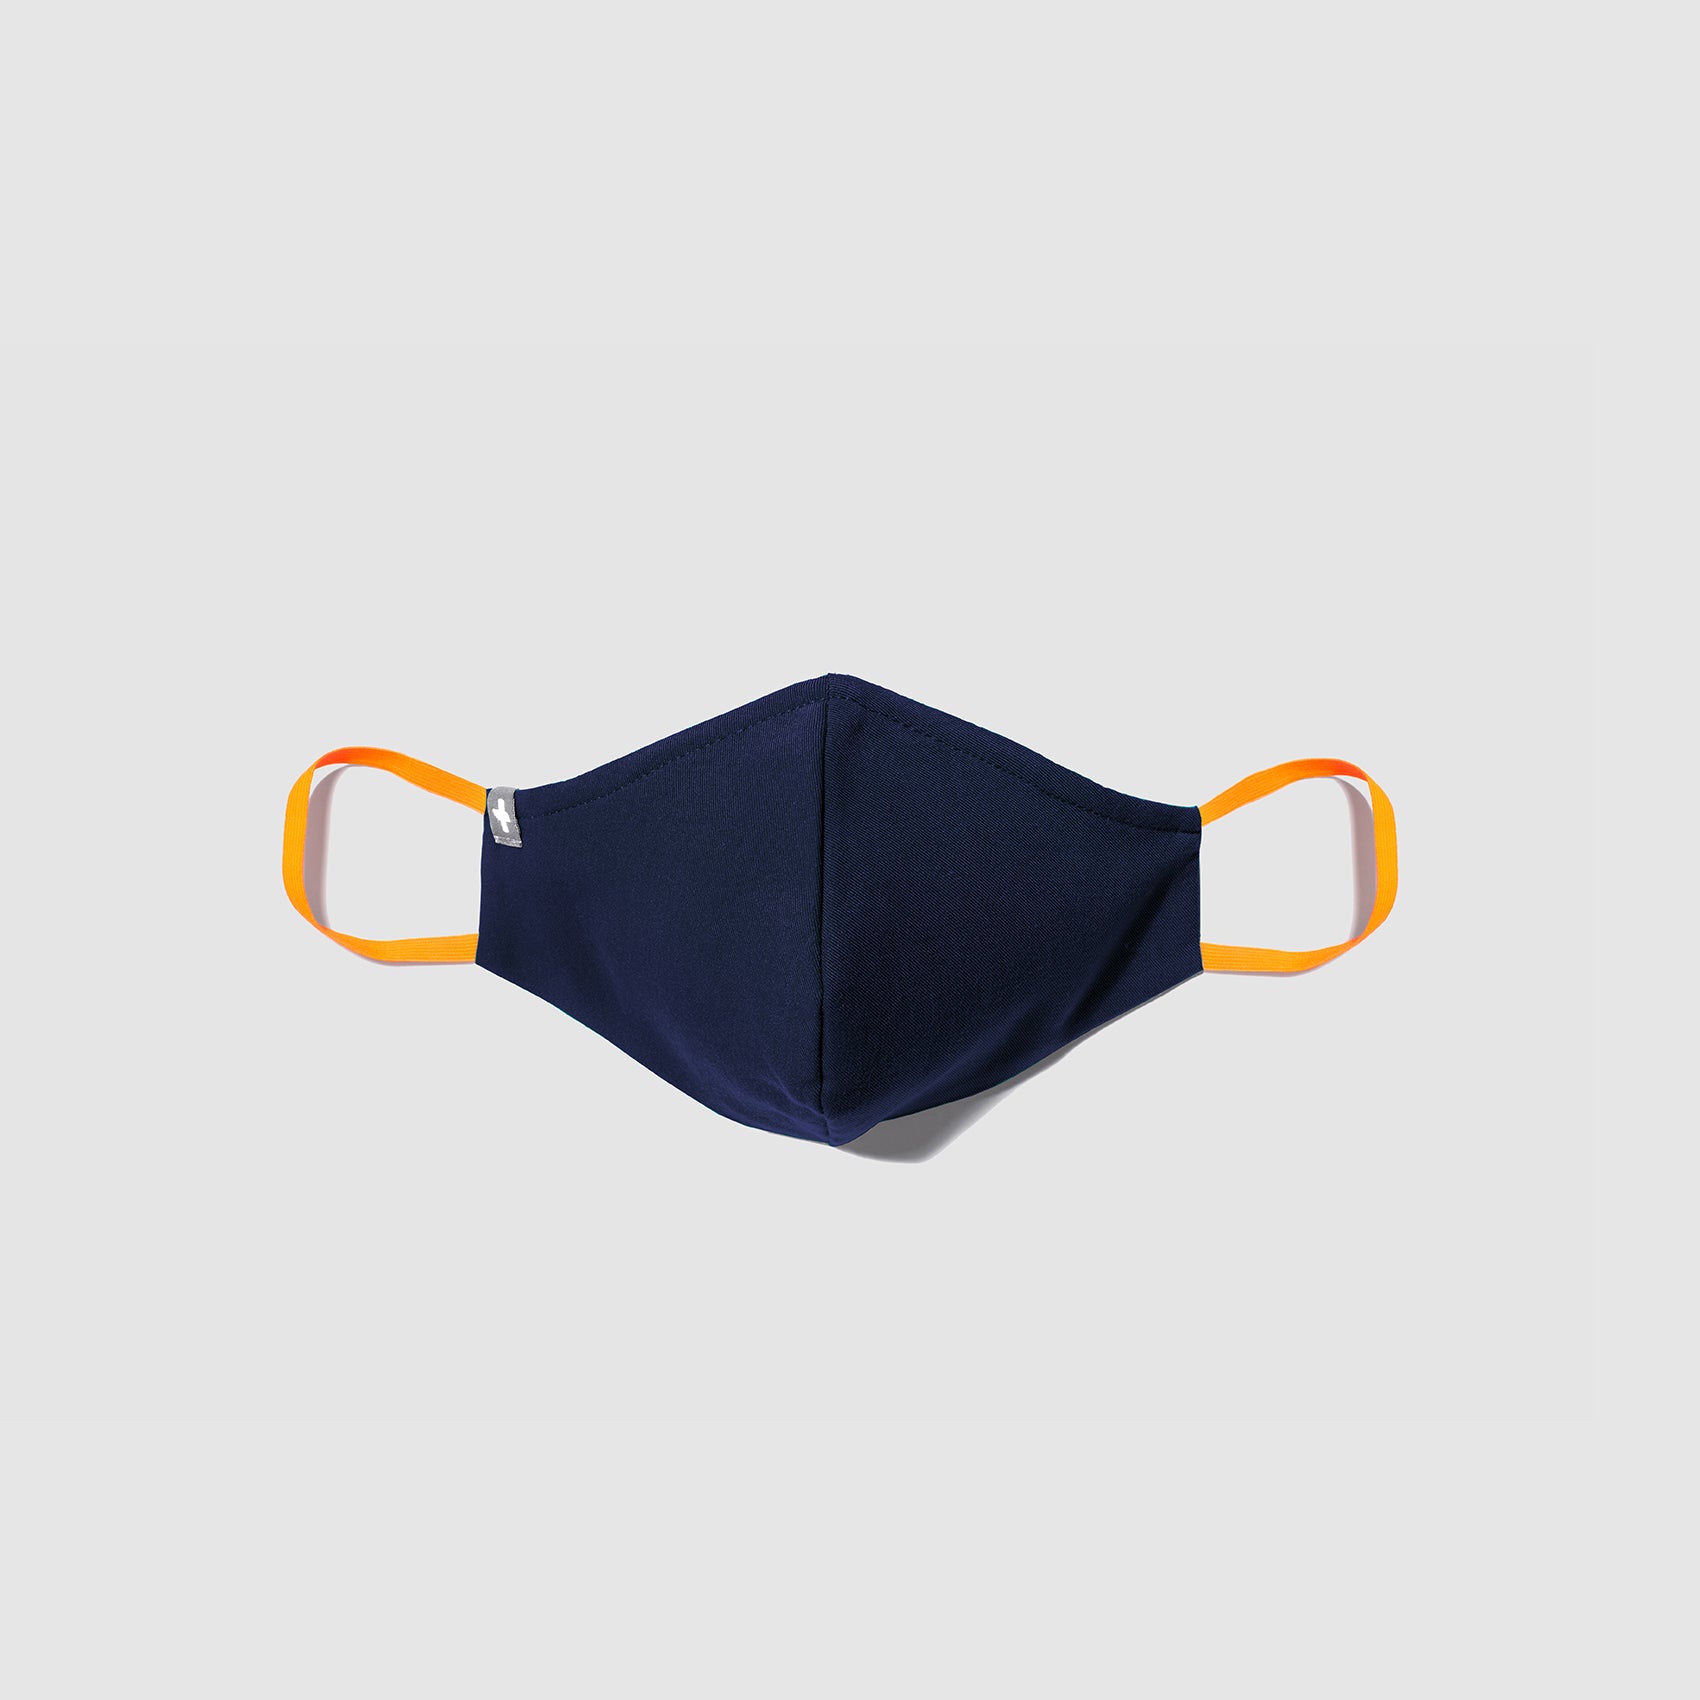 https://cdn.shopify.com/s/files/1/0139/8942/products/FIONx_Protective_Mask-navy-1.jpg?v=1659036507